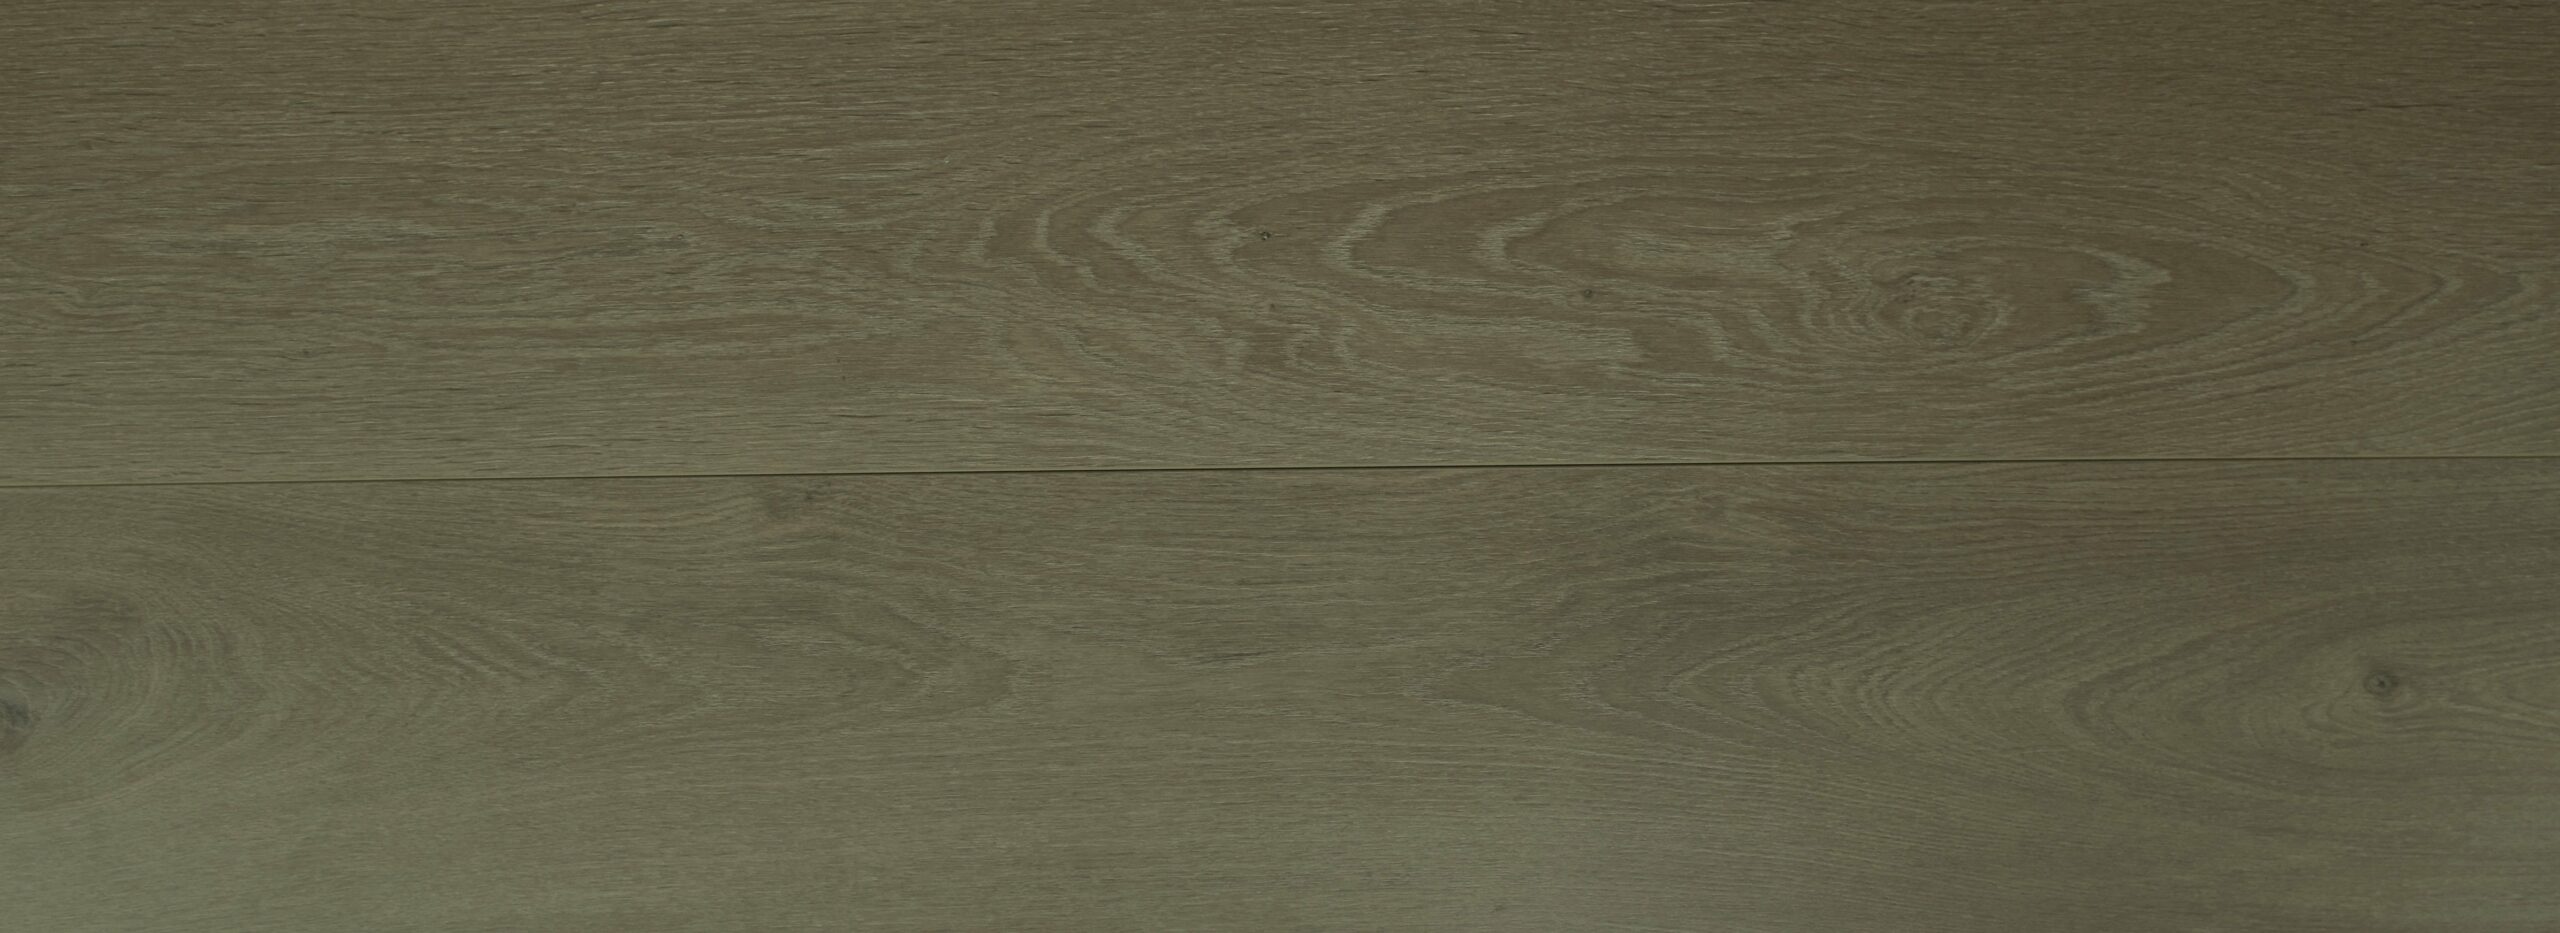 Fumed Oak Optimum Laminate Flooring with Built-In EIR Backing and AC4 wear layer